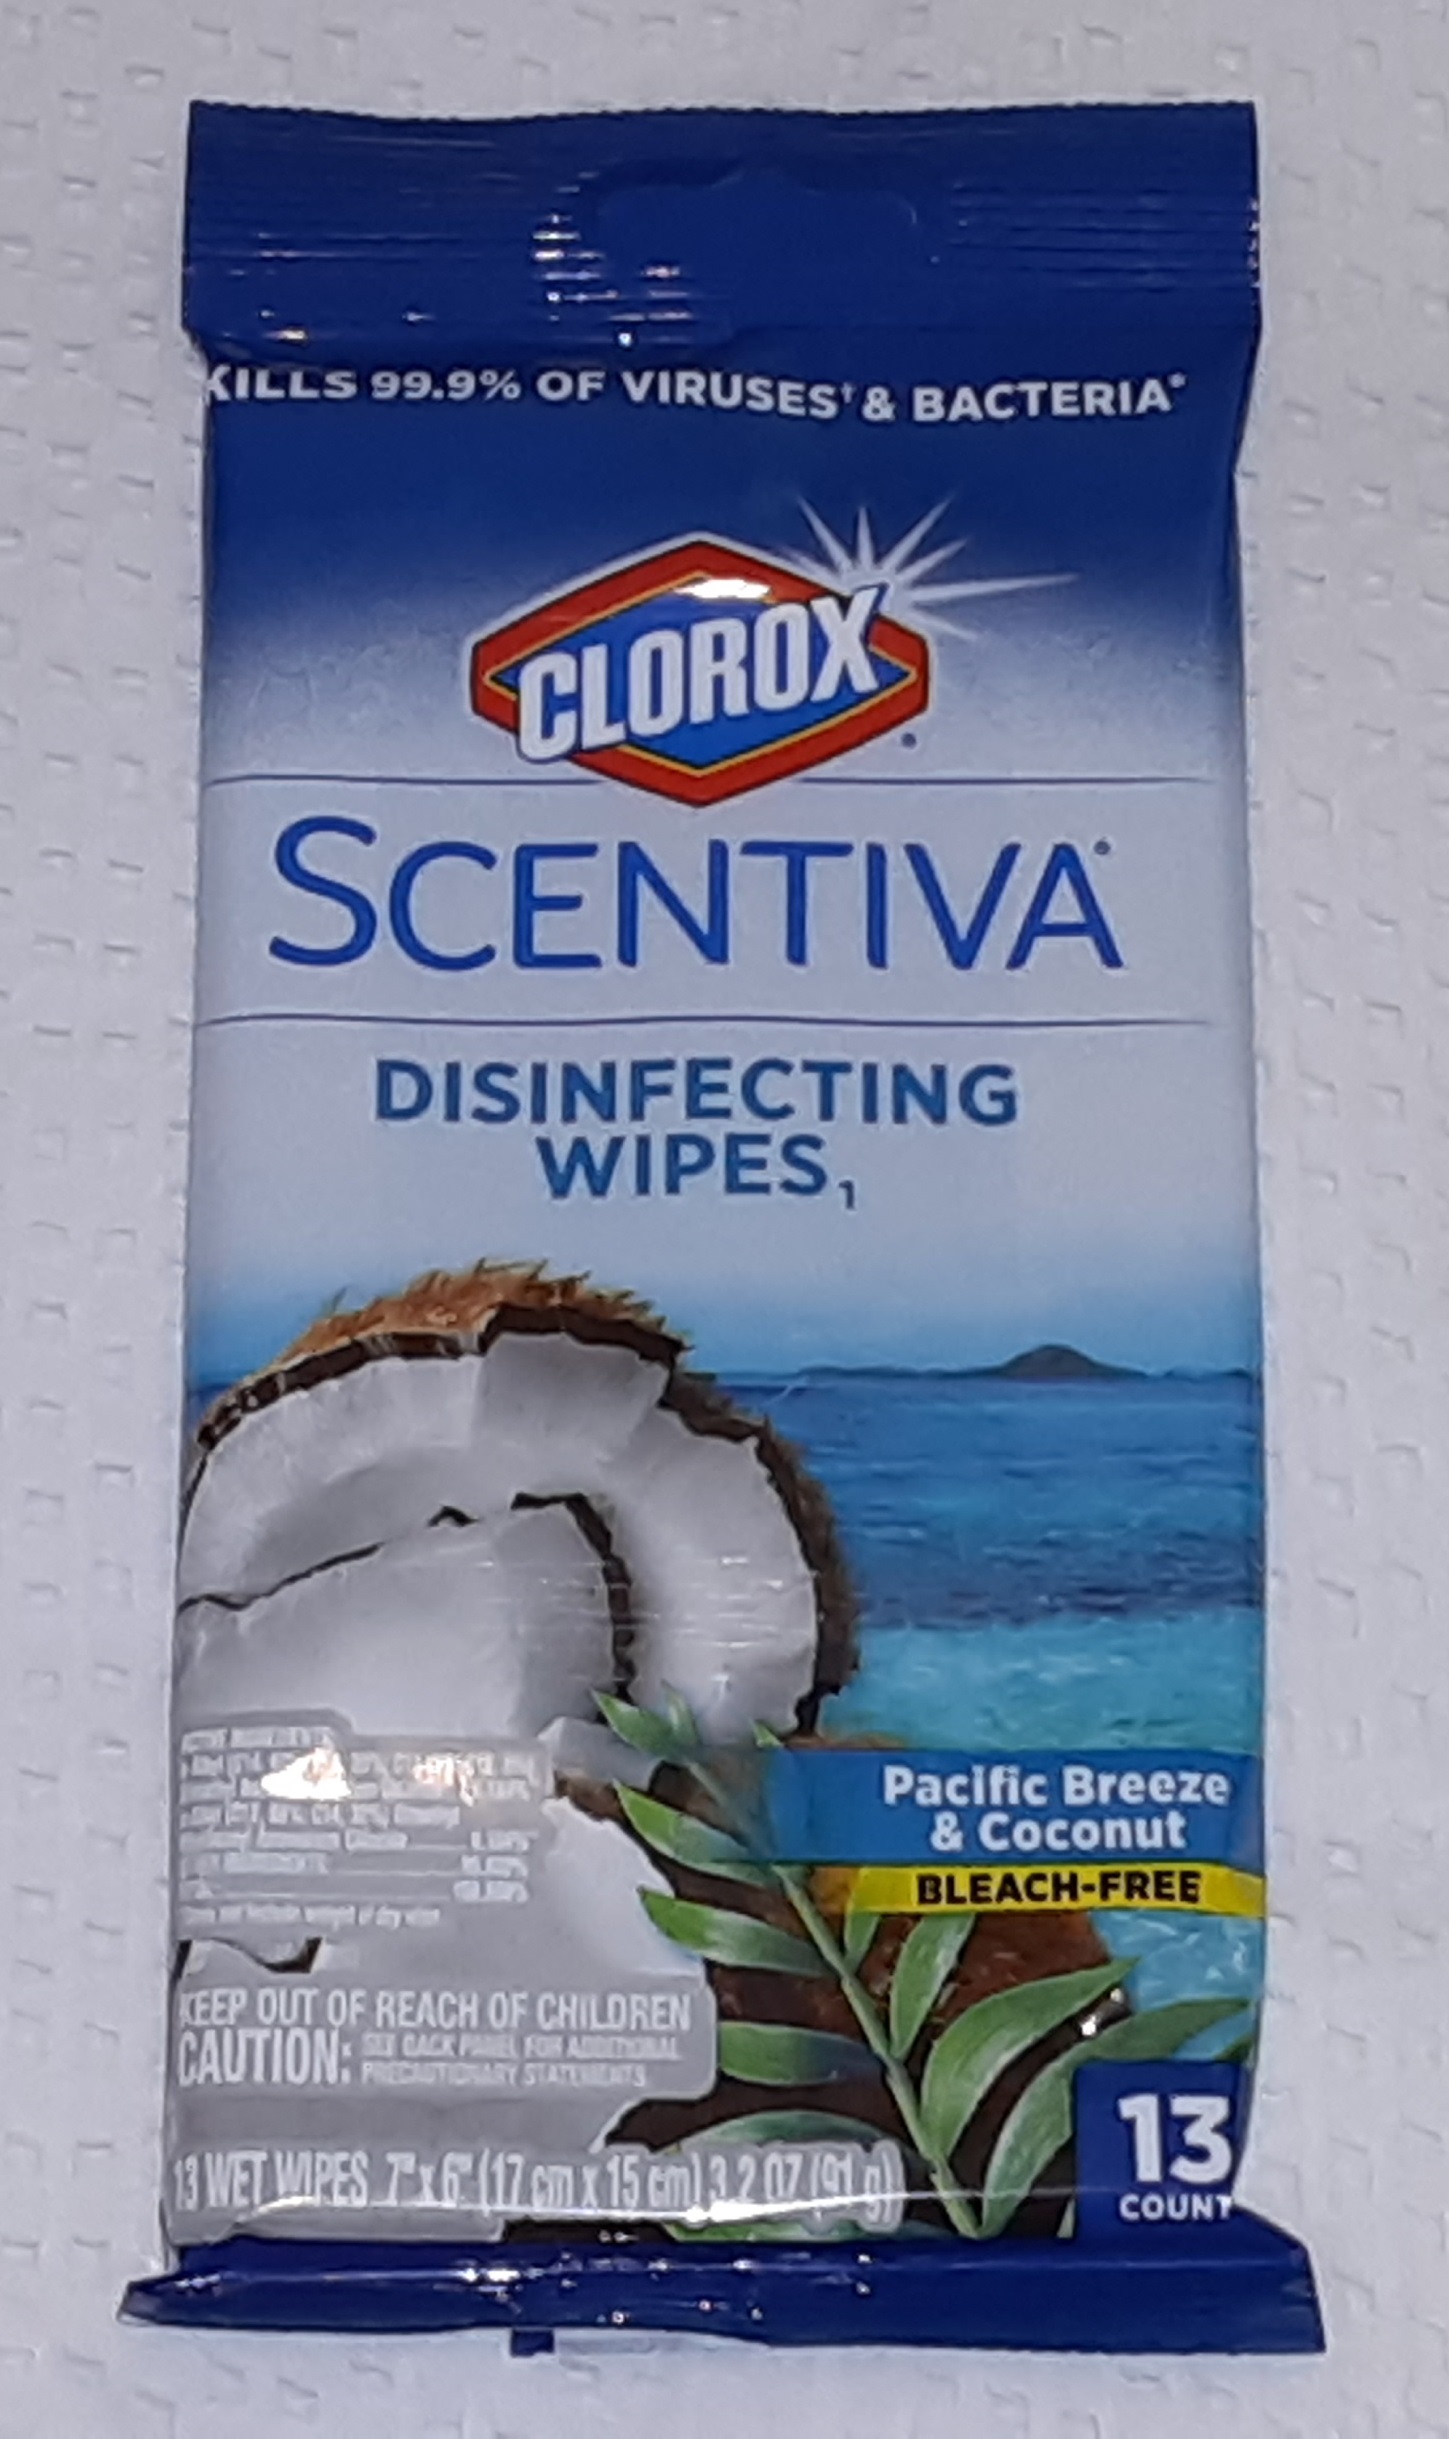 Clorox Disinfecting Wipes 13 Pack -Travel Pack - scentiva 